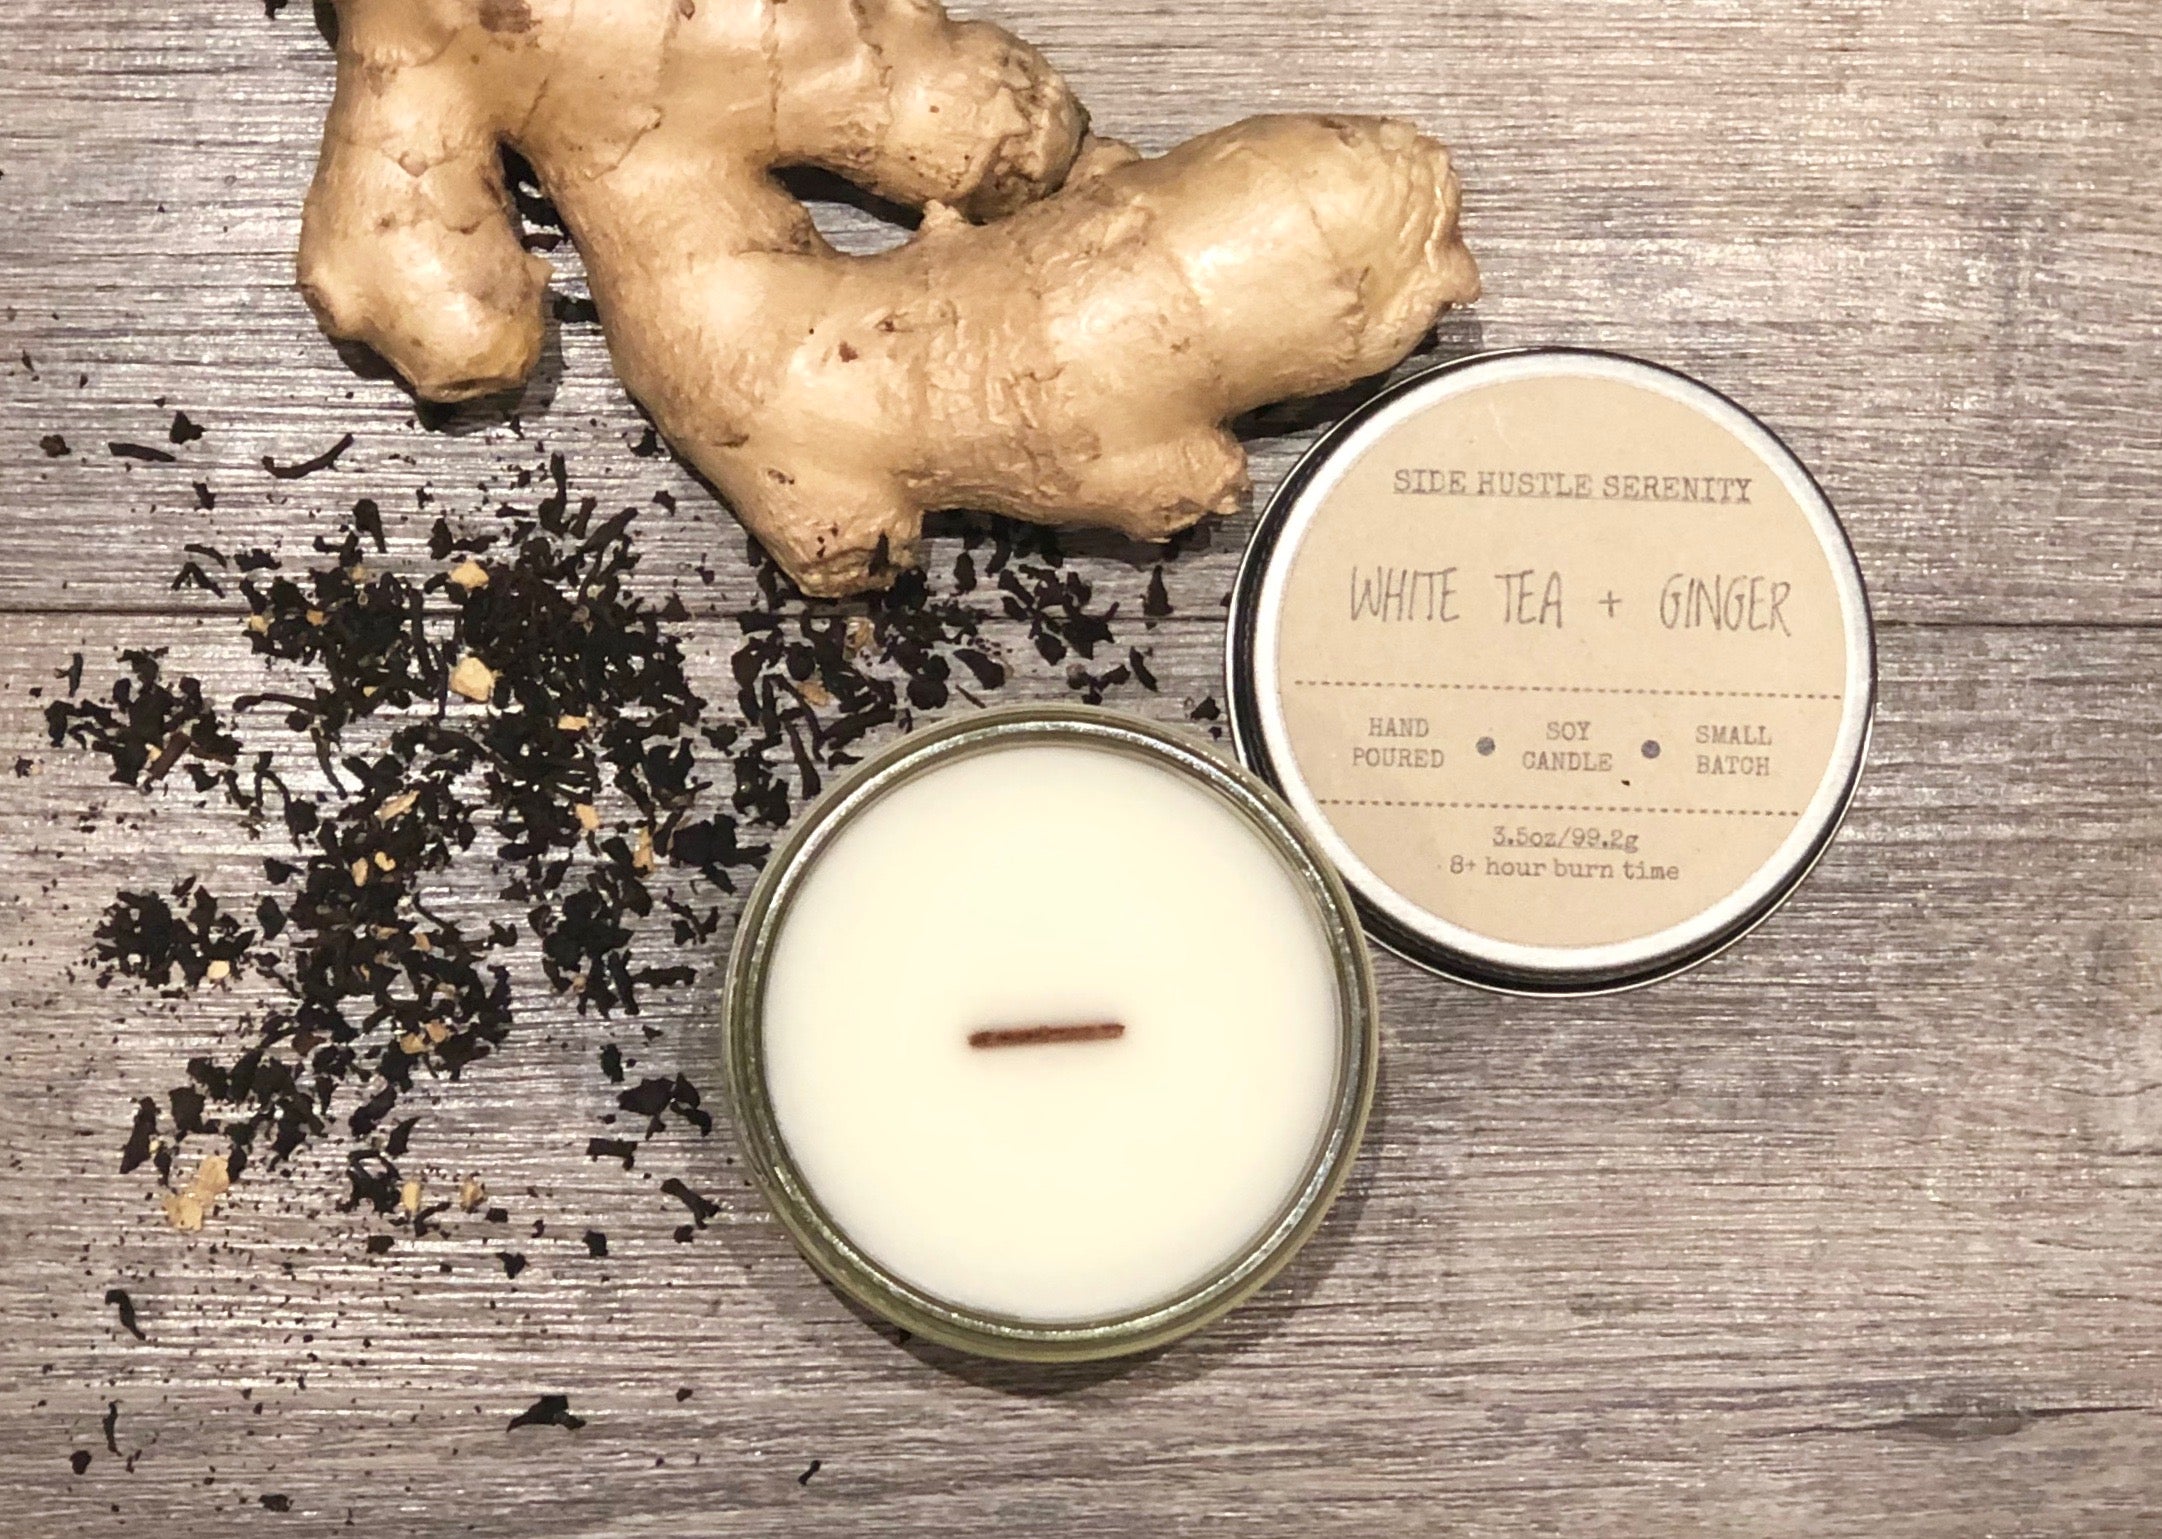 White Tea + Ginger Scented Soy Candle - Side Hustle Serenity